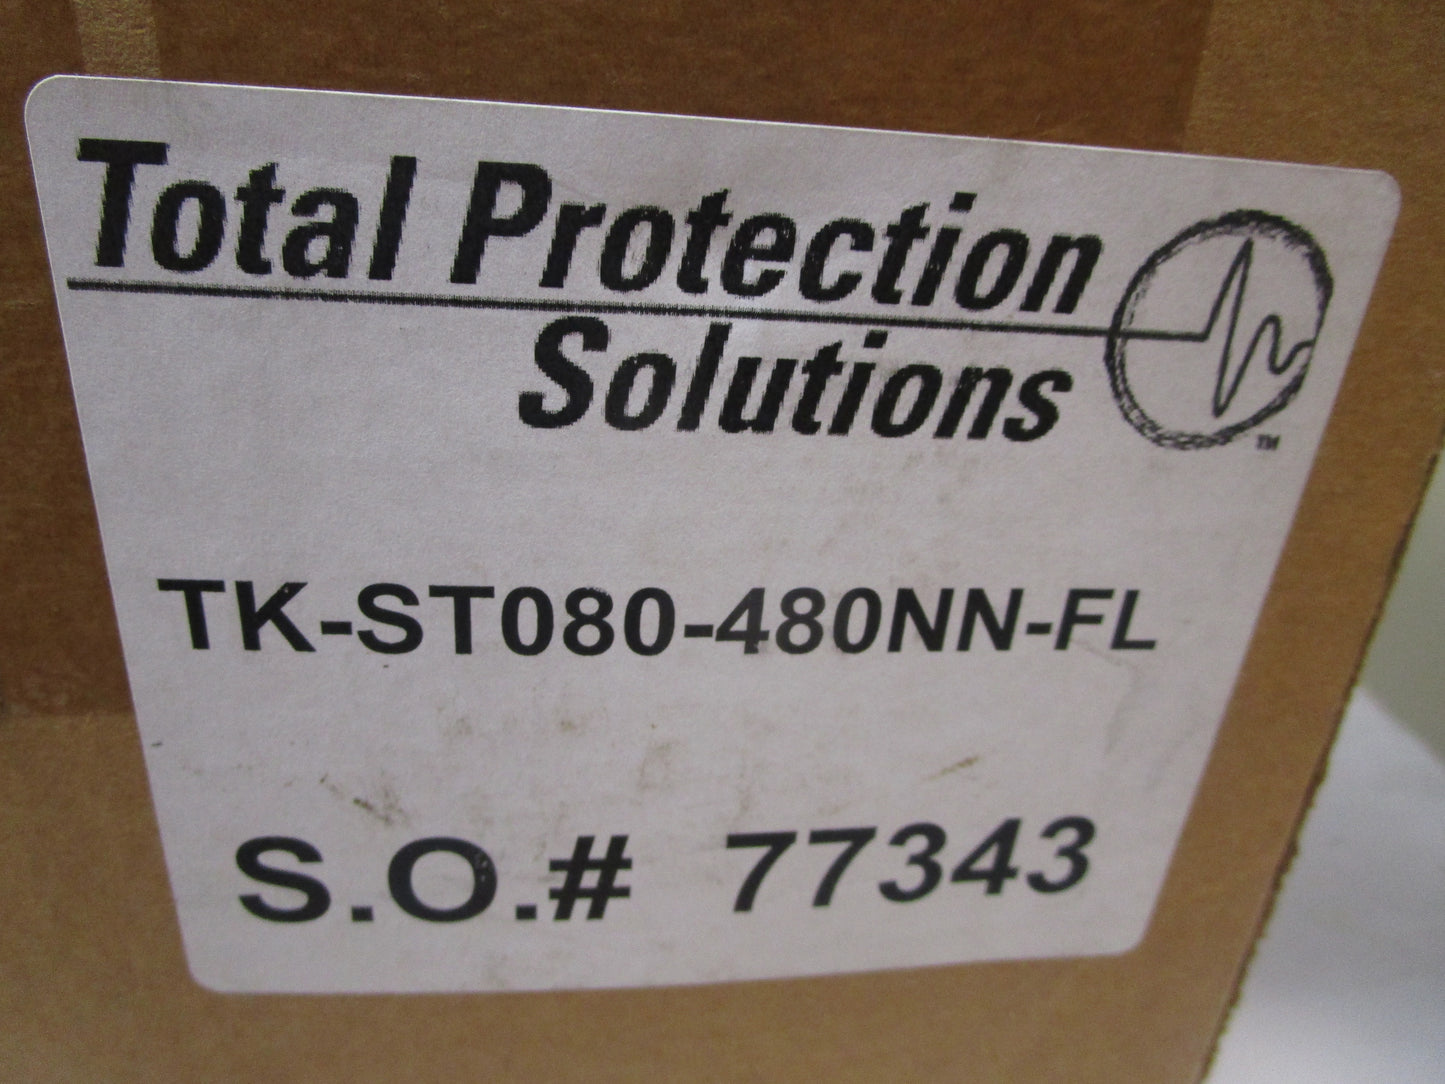 TOTAL PROTECTION SOLUTIONS TK-ST080-480NN-FL Surge Protection